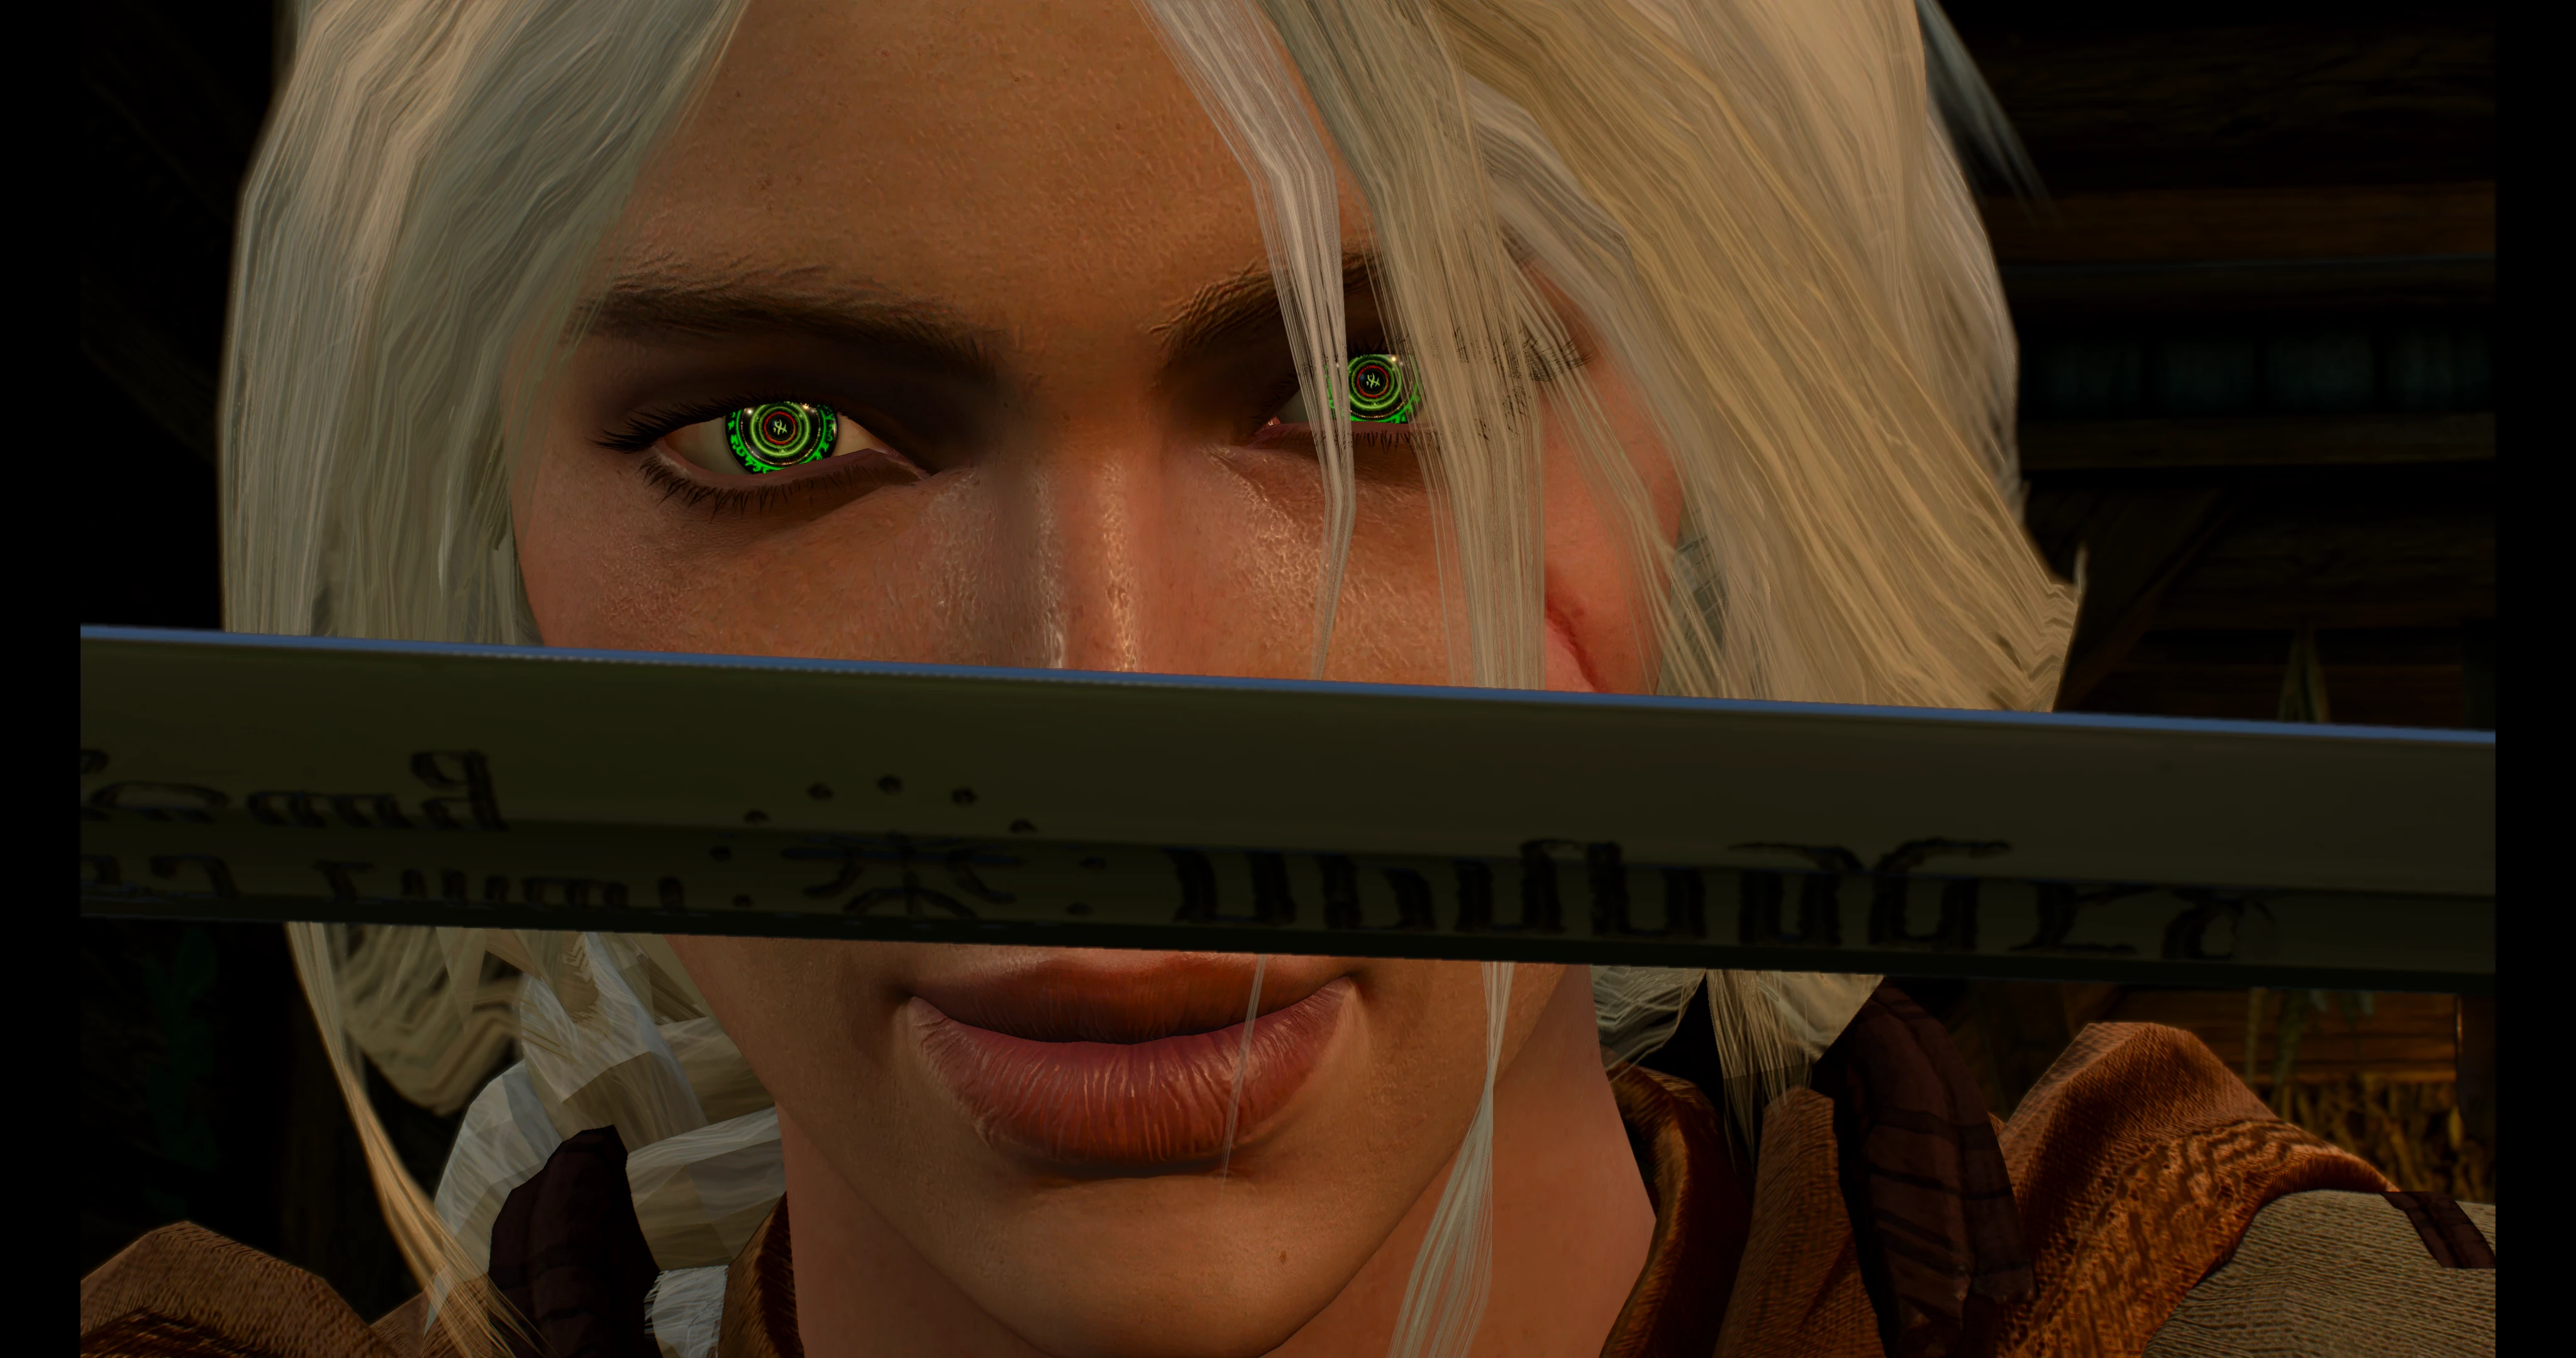 witcher 3 eye for an eye decision